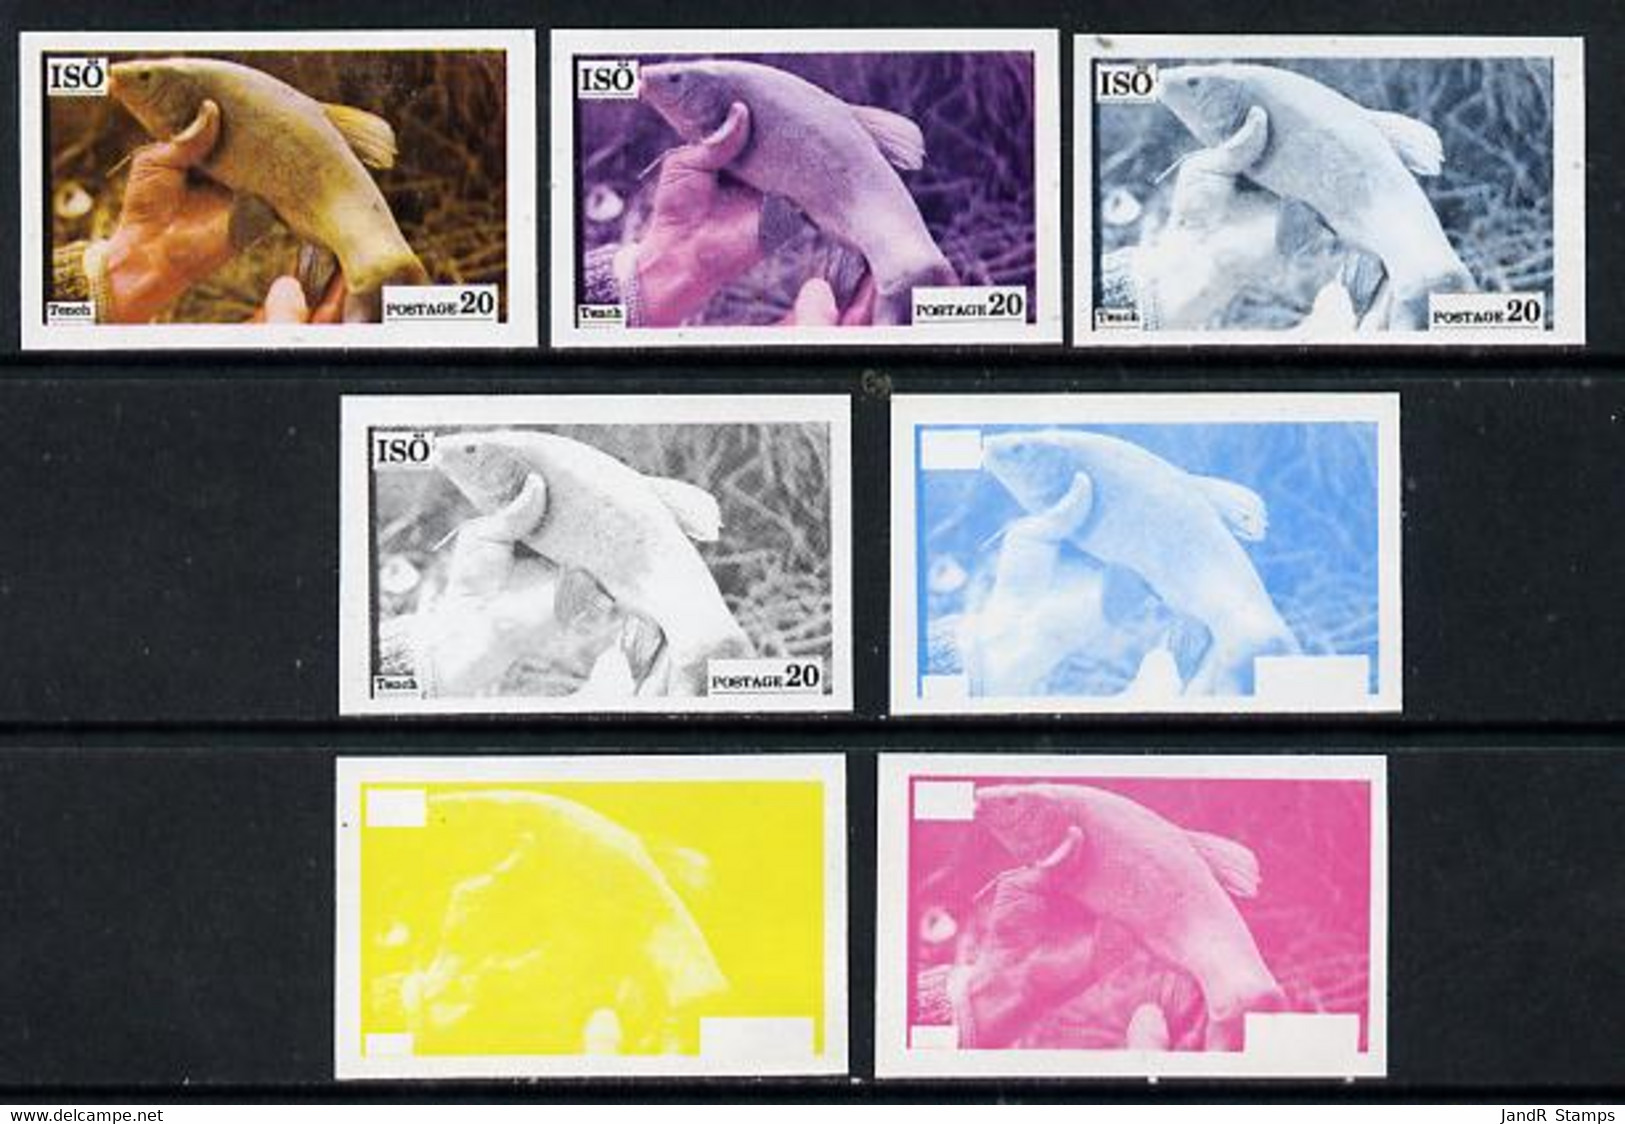 Iso - Sweden 1973 Fish 20 (Tench) Set Of 7 Imperf Progressive Colour Proofs Comprising The 4 Individual Colours Plus 2, - Local Post Stamps